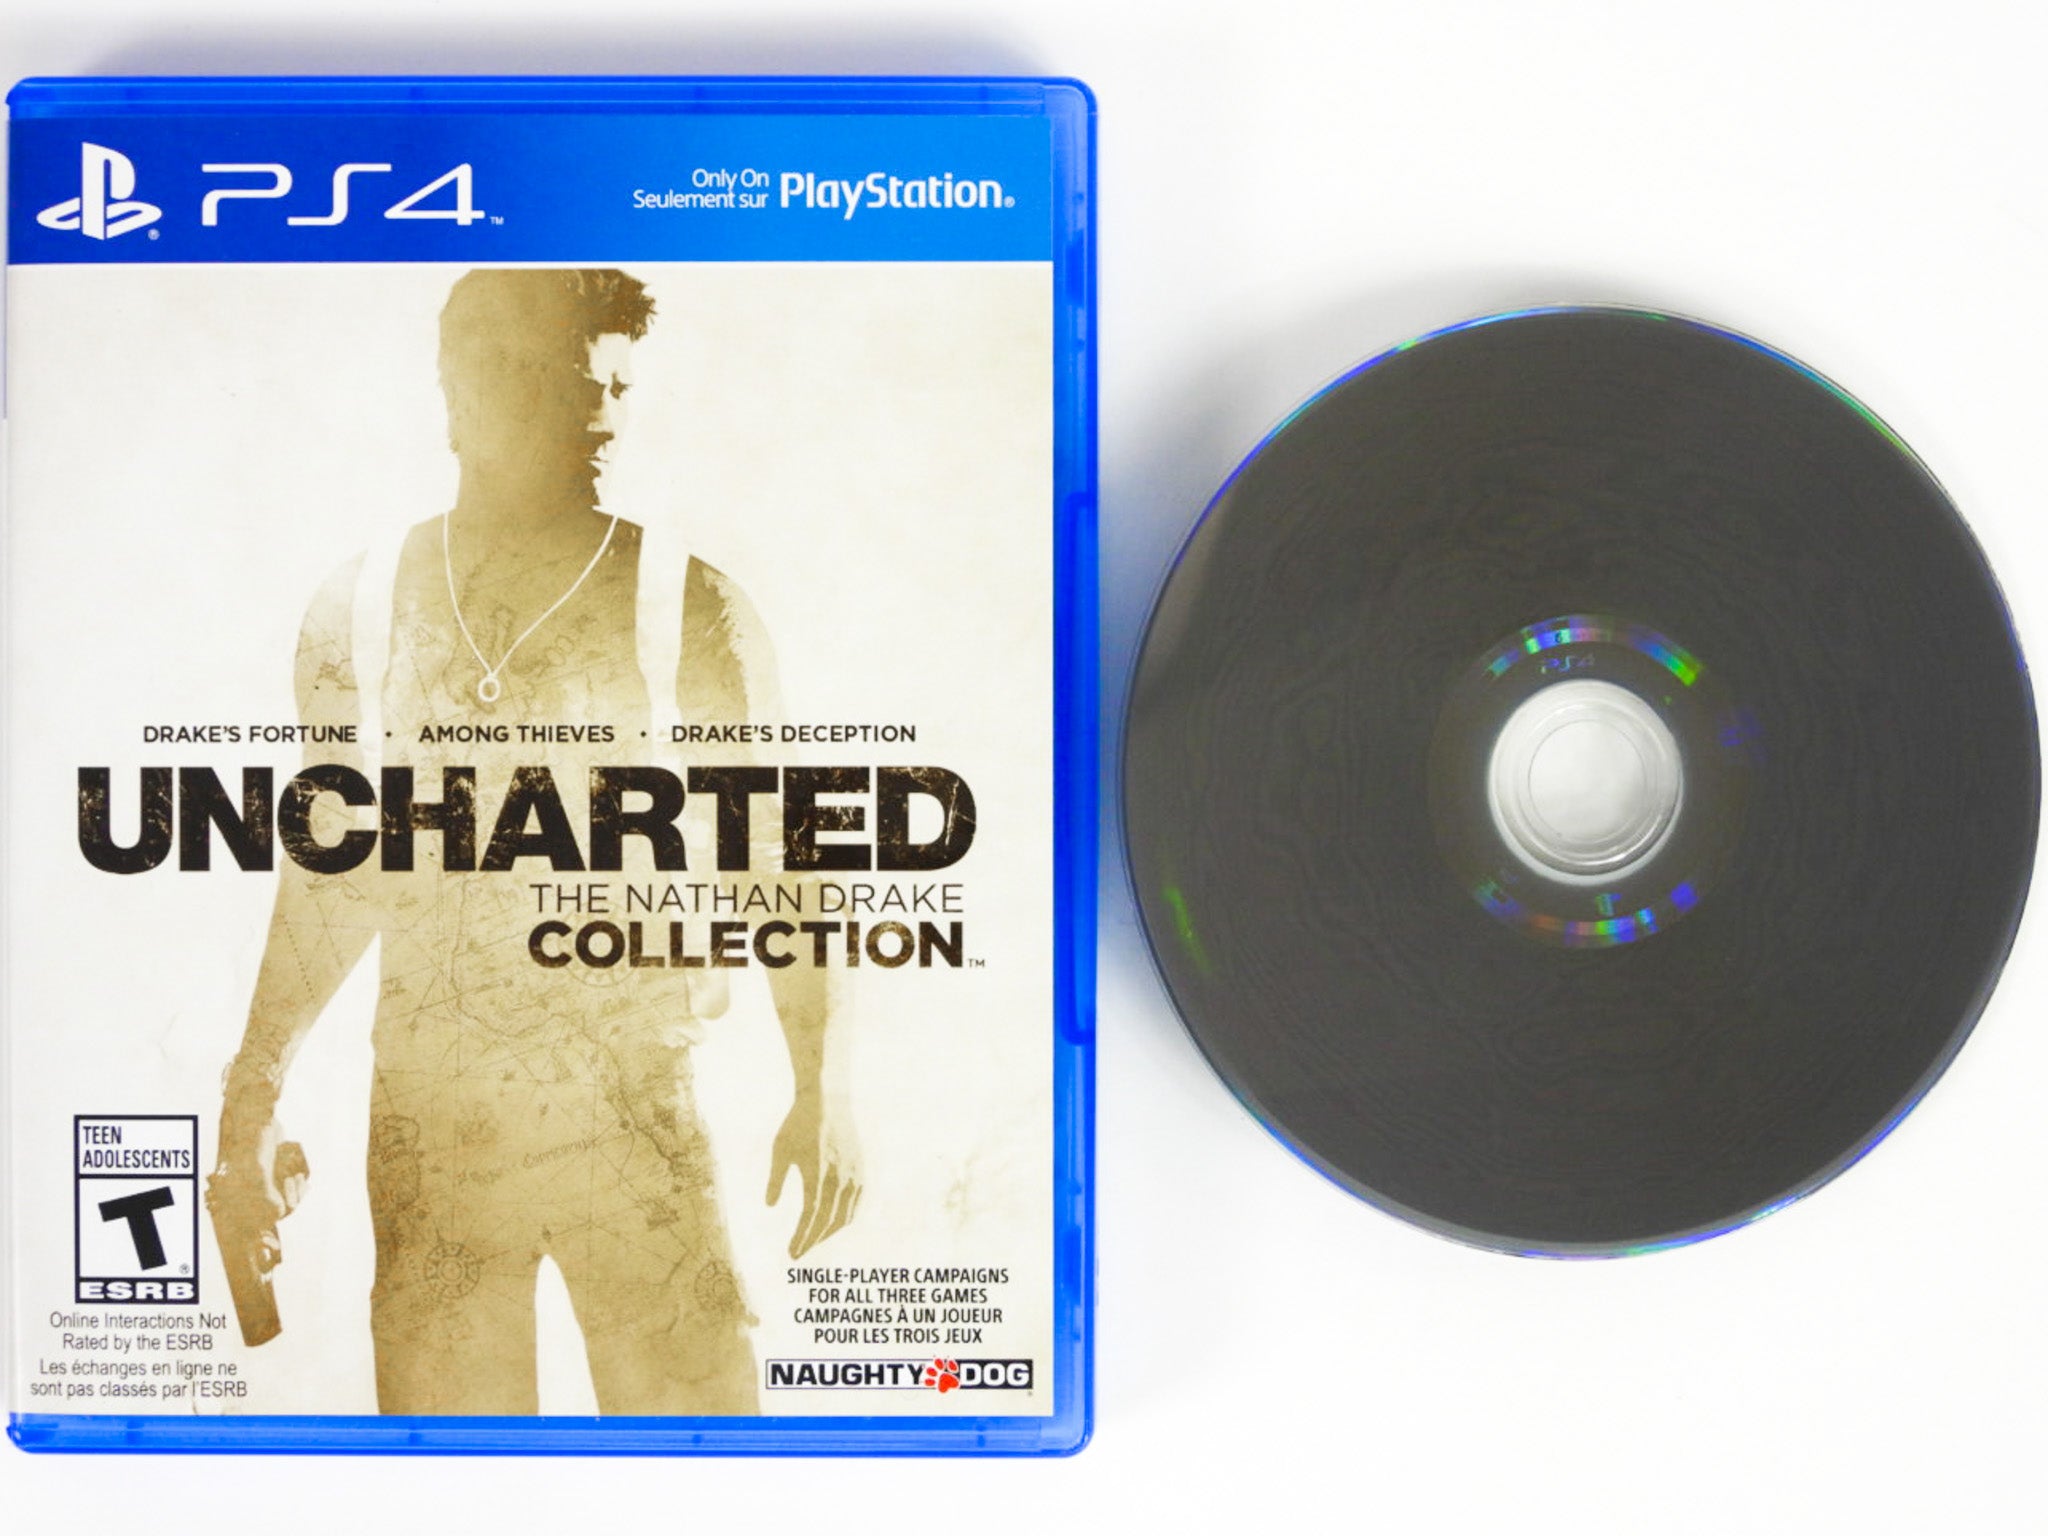 (Playstation Uncharted RetroMTL PS4) 4 Nathan / Drake Collection – The